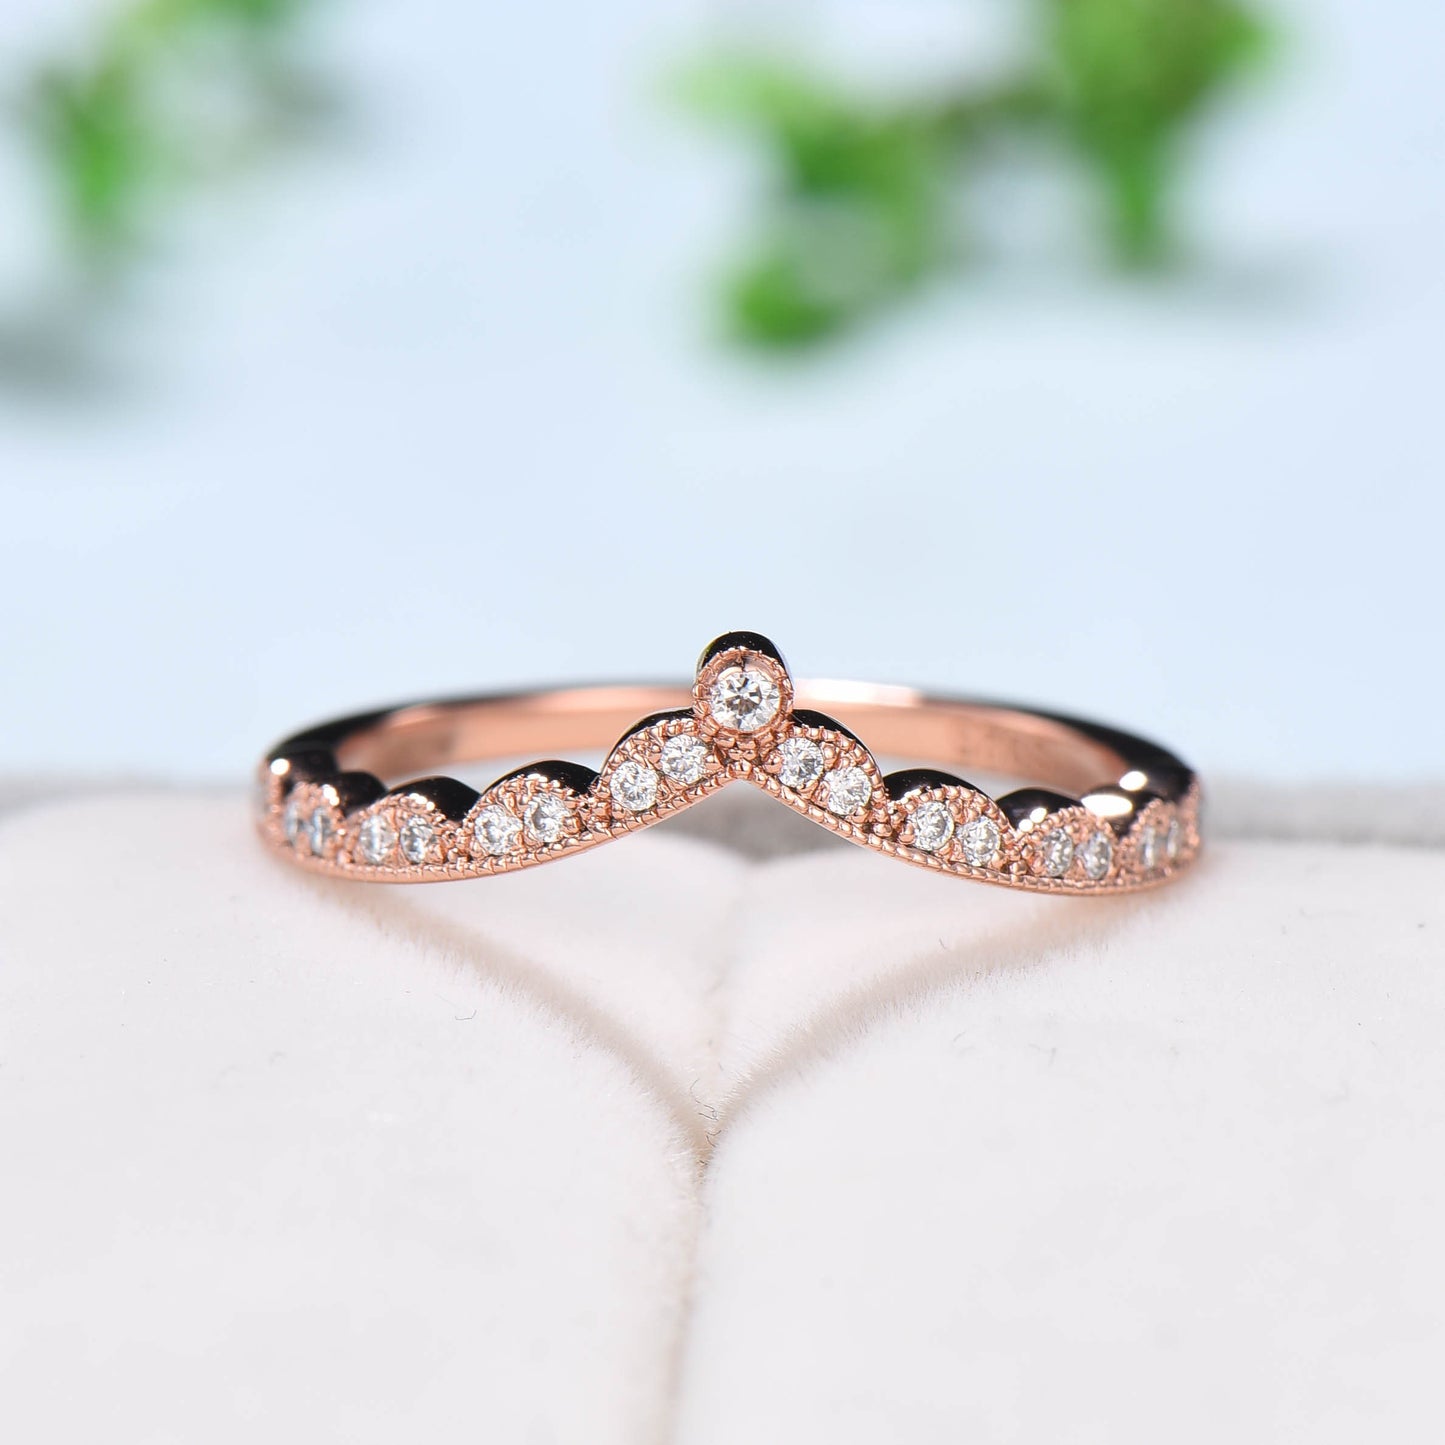 Art deco dainty curved Diamond wedding band Unique rose gold mulgrain stacking band art deco moissanite matching band Anniversary Gift - PENFINE